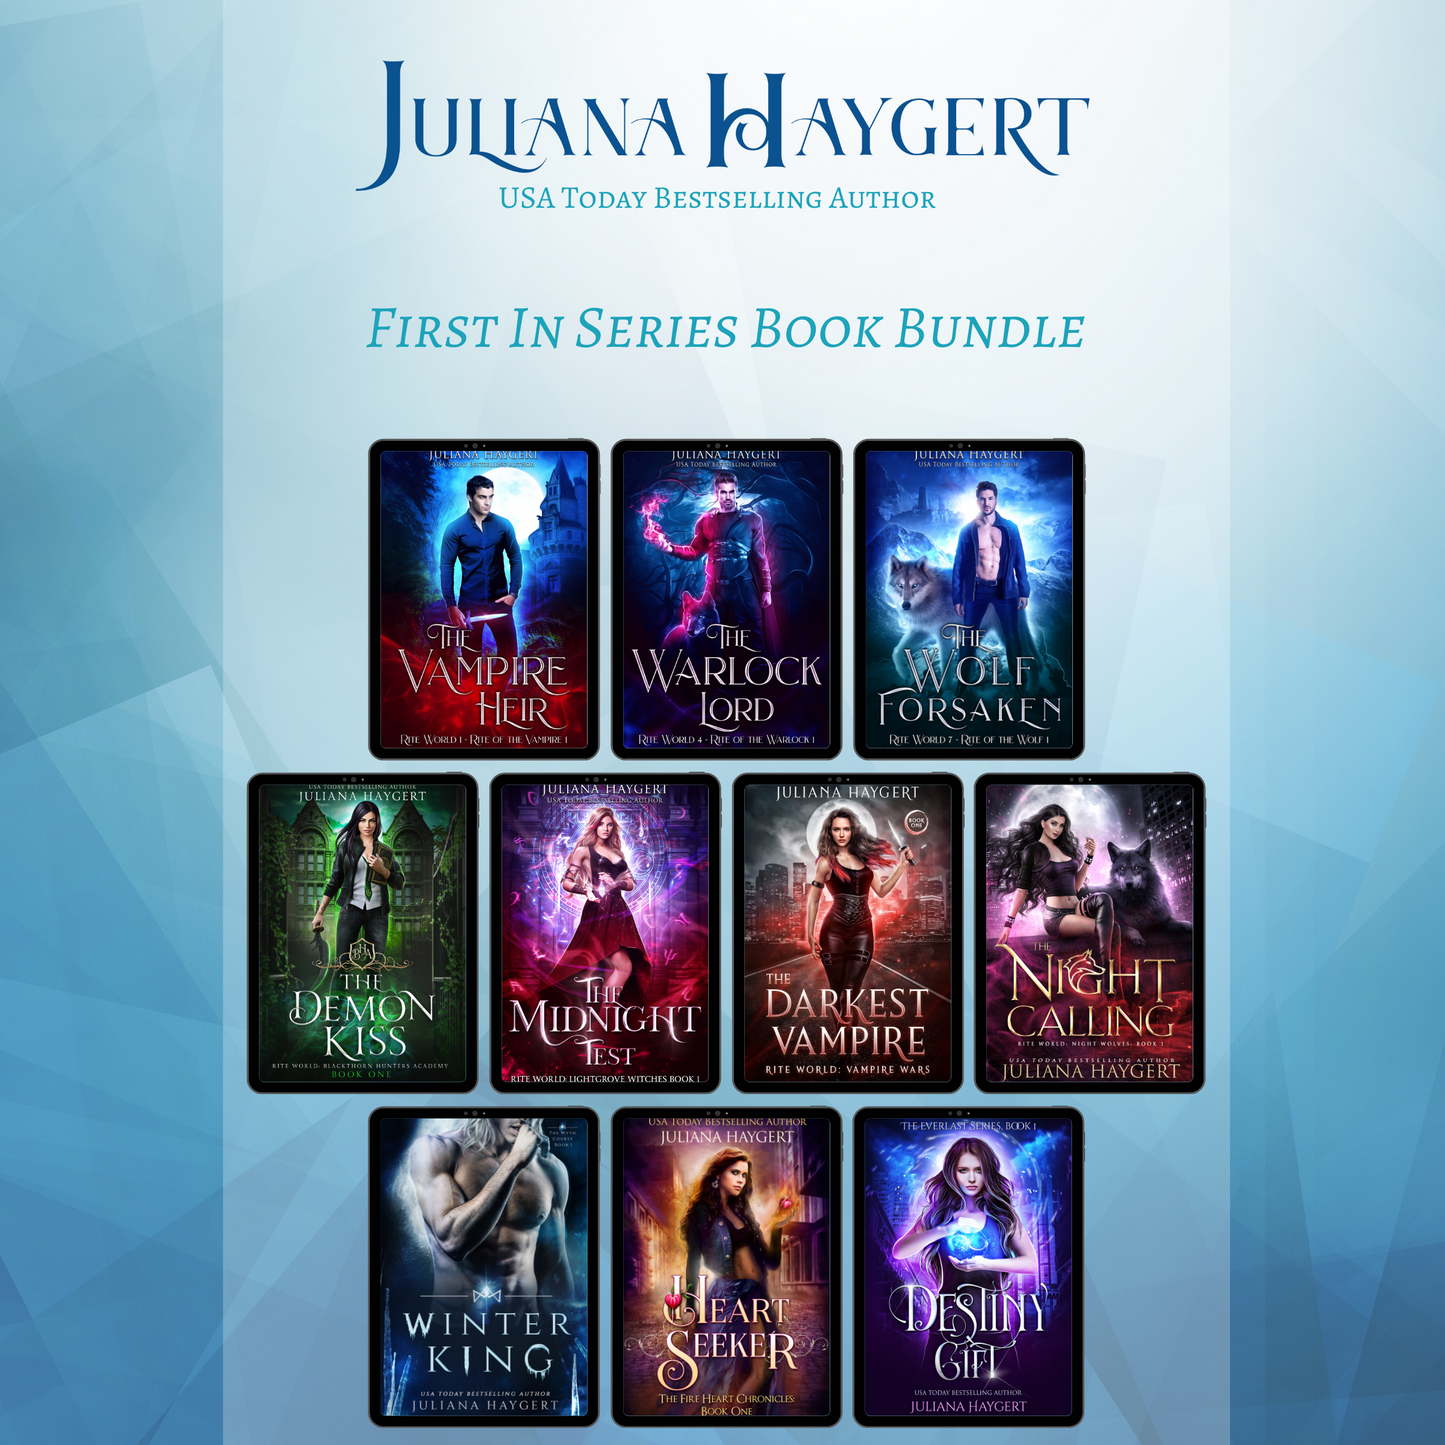 First in Series Book Bundle